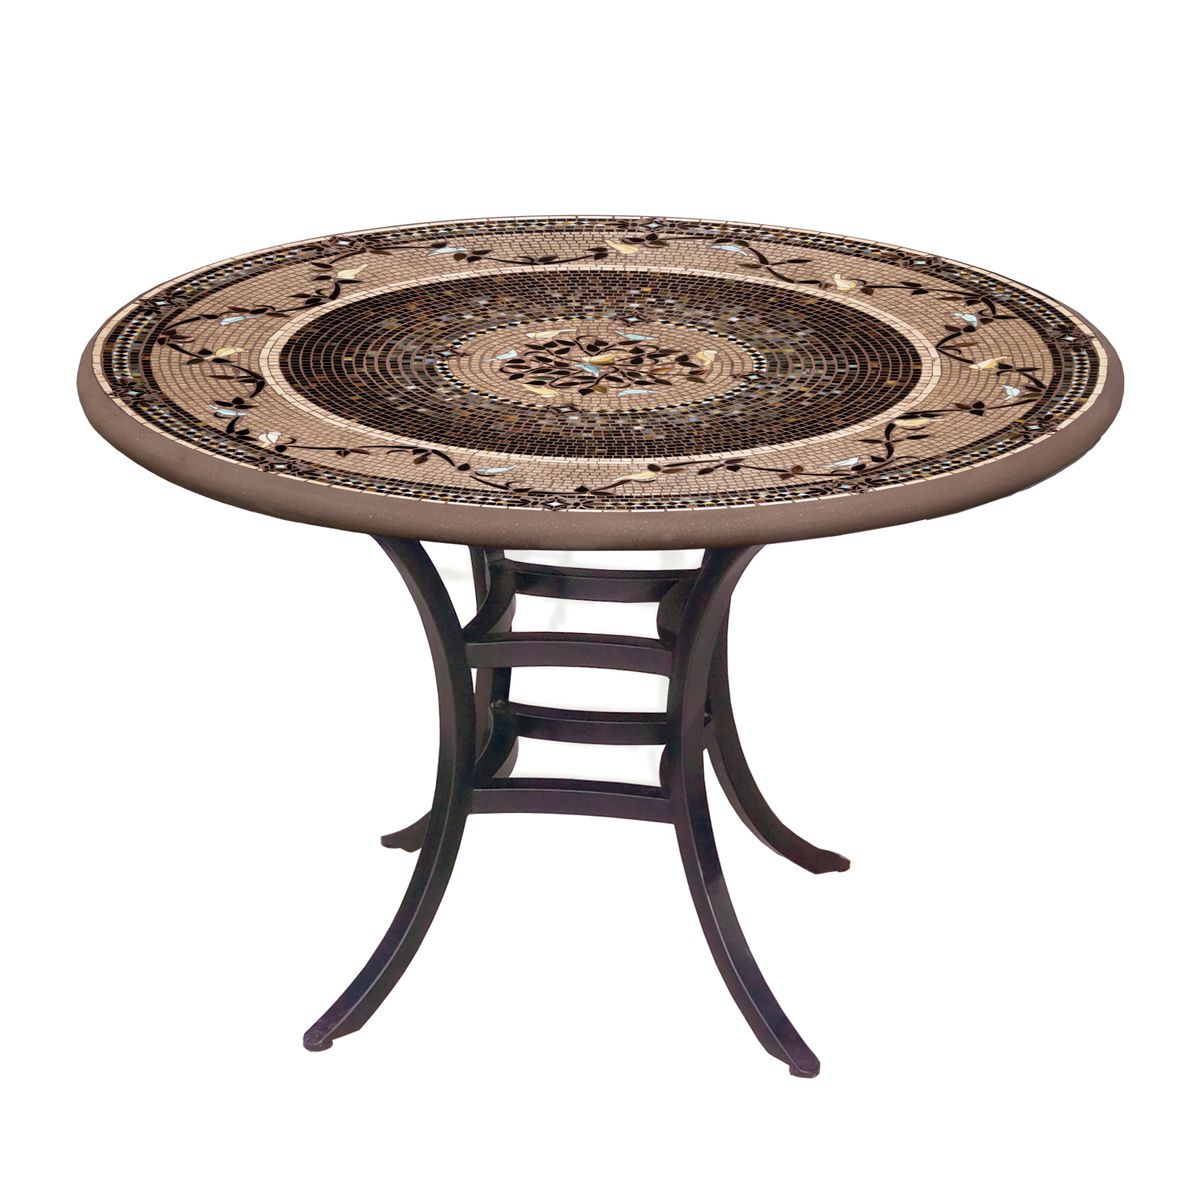 Provence Mosaic Patio Table-Iron Accents